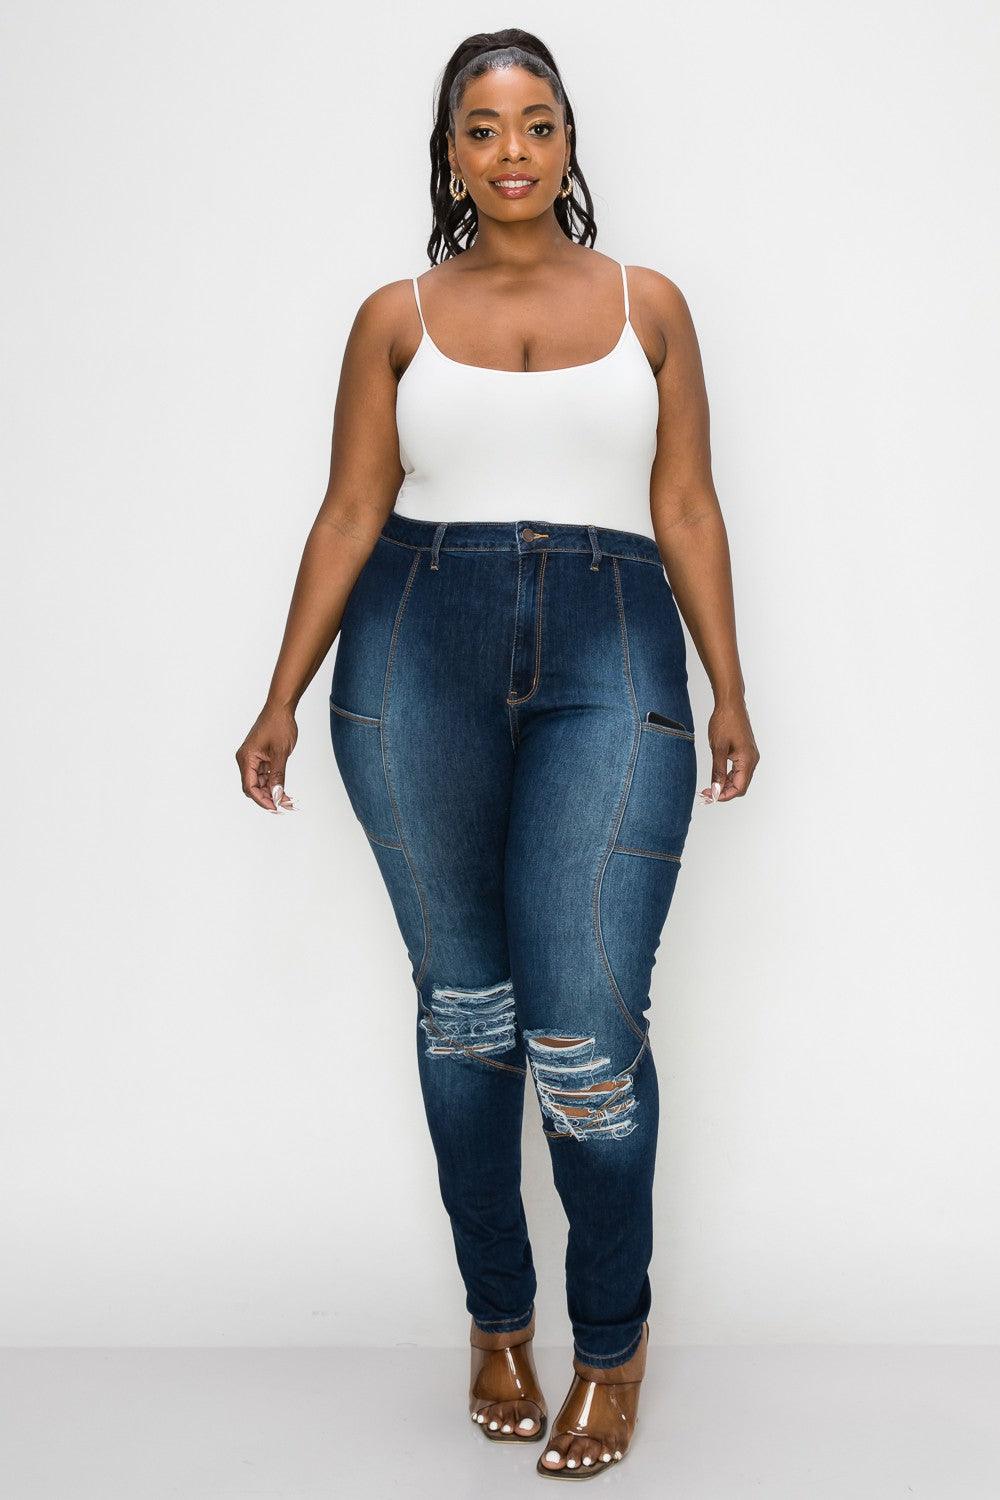 "Don't Play" Curvy Skinny Jeans - Mint Leafe Boutique 